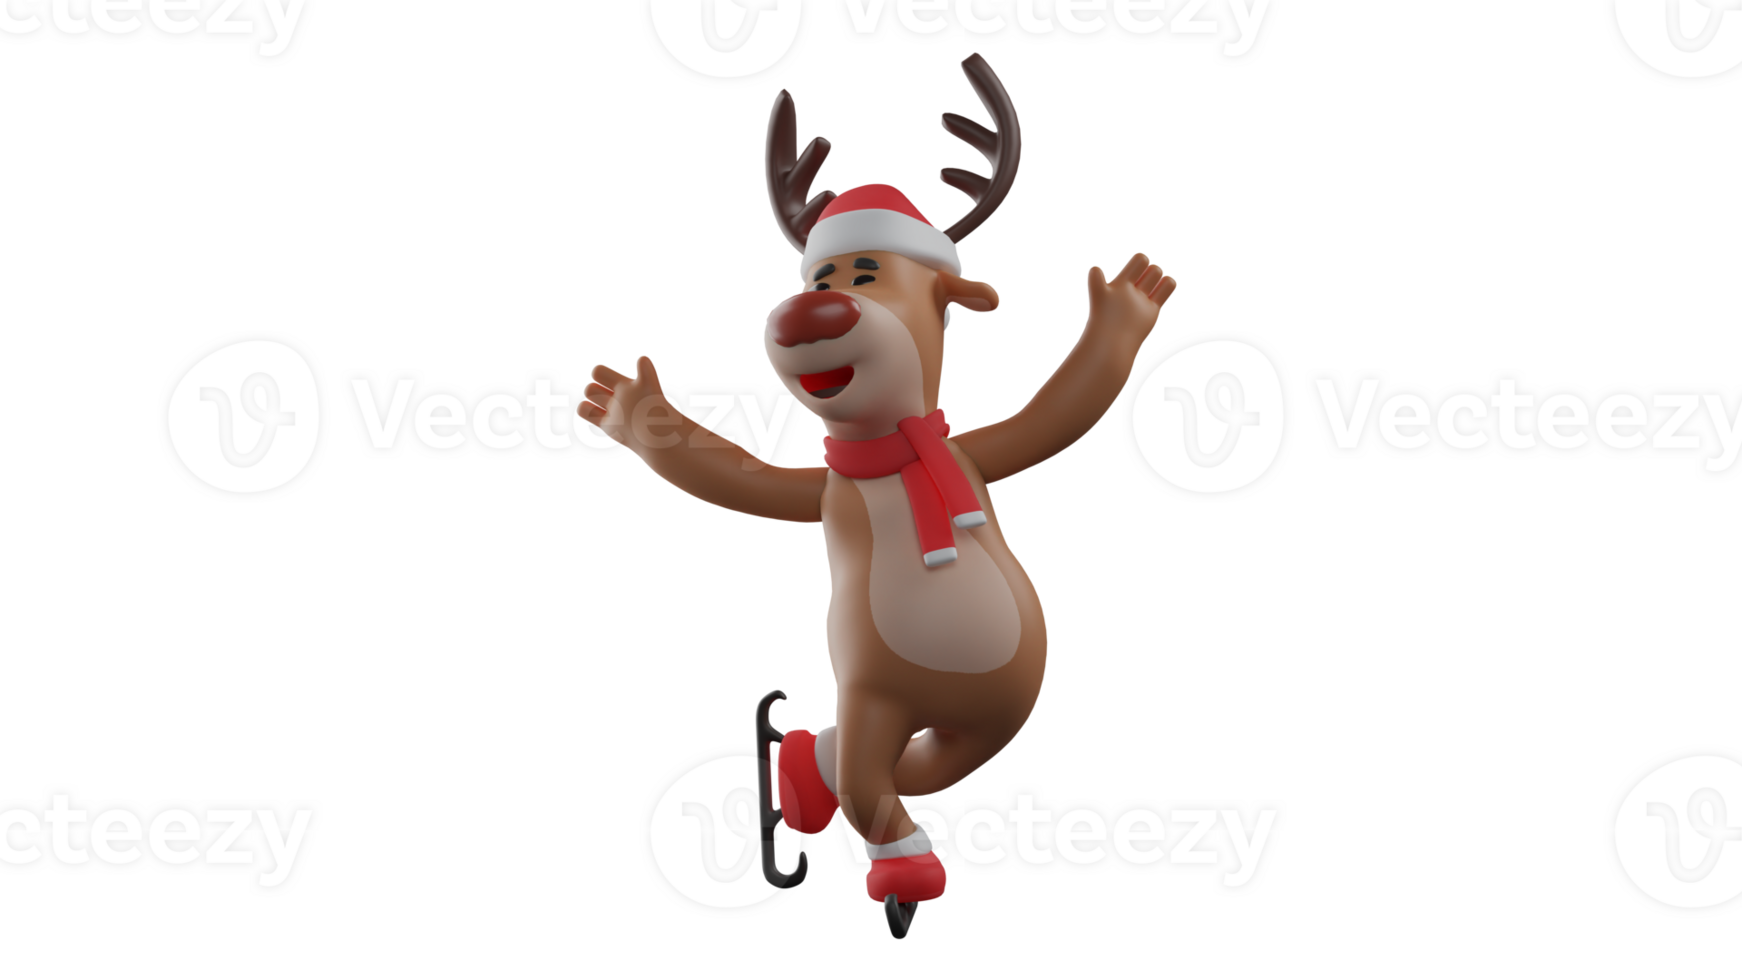 3D illustration. Cute Deer 3D cartoon character. Christmas reindeer hopping for joy. The deer shows a happy expression. Very expressive Christmas reindeer. 3D cartoon character png